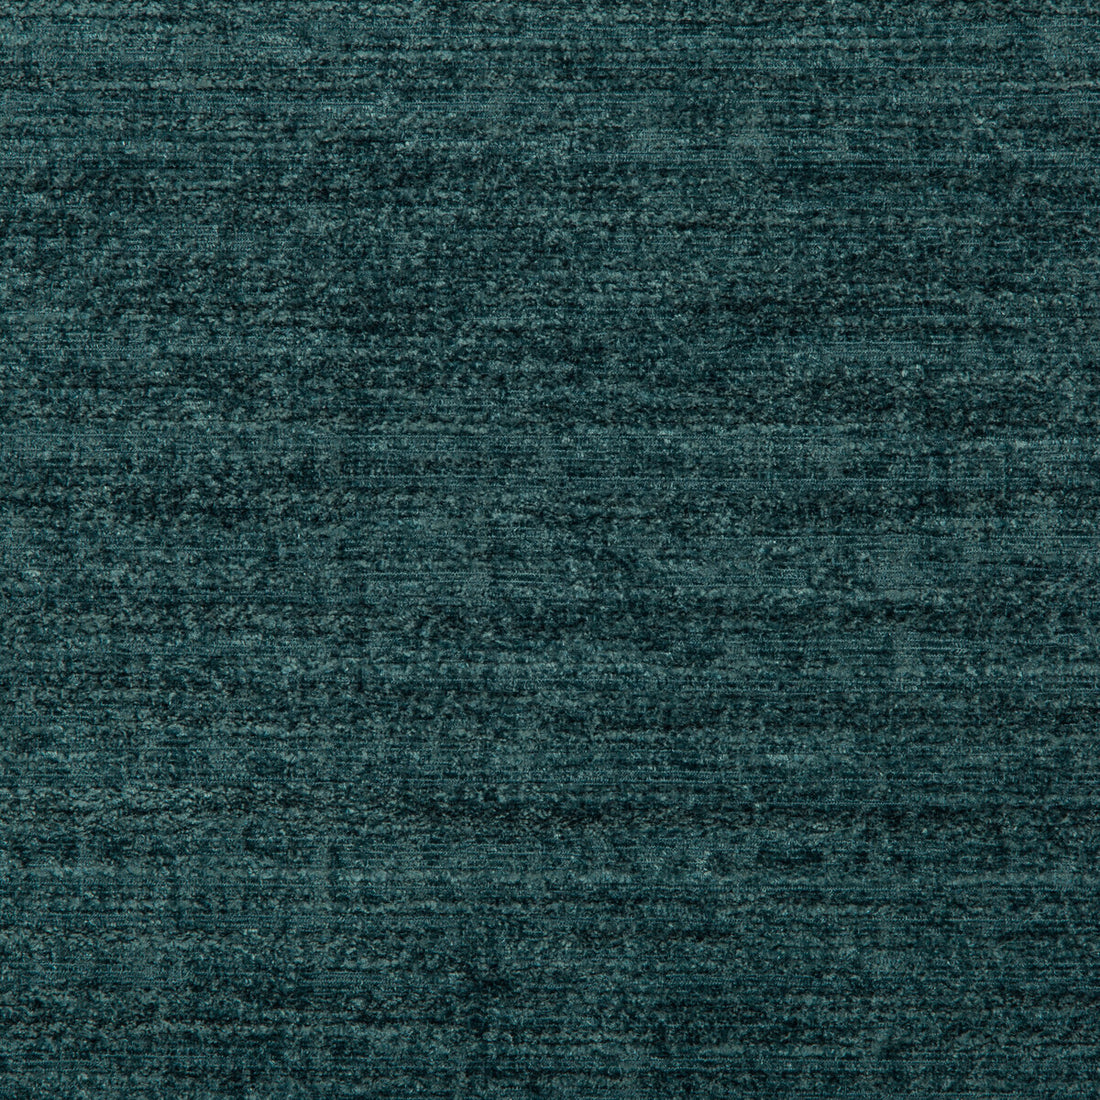 Kravet Smart fabric in 35779-35 color - pattern 35779.35.0 - by Kravet Smart in the Performance collection